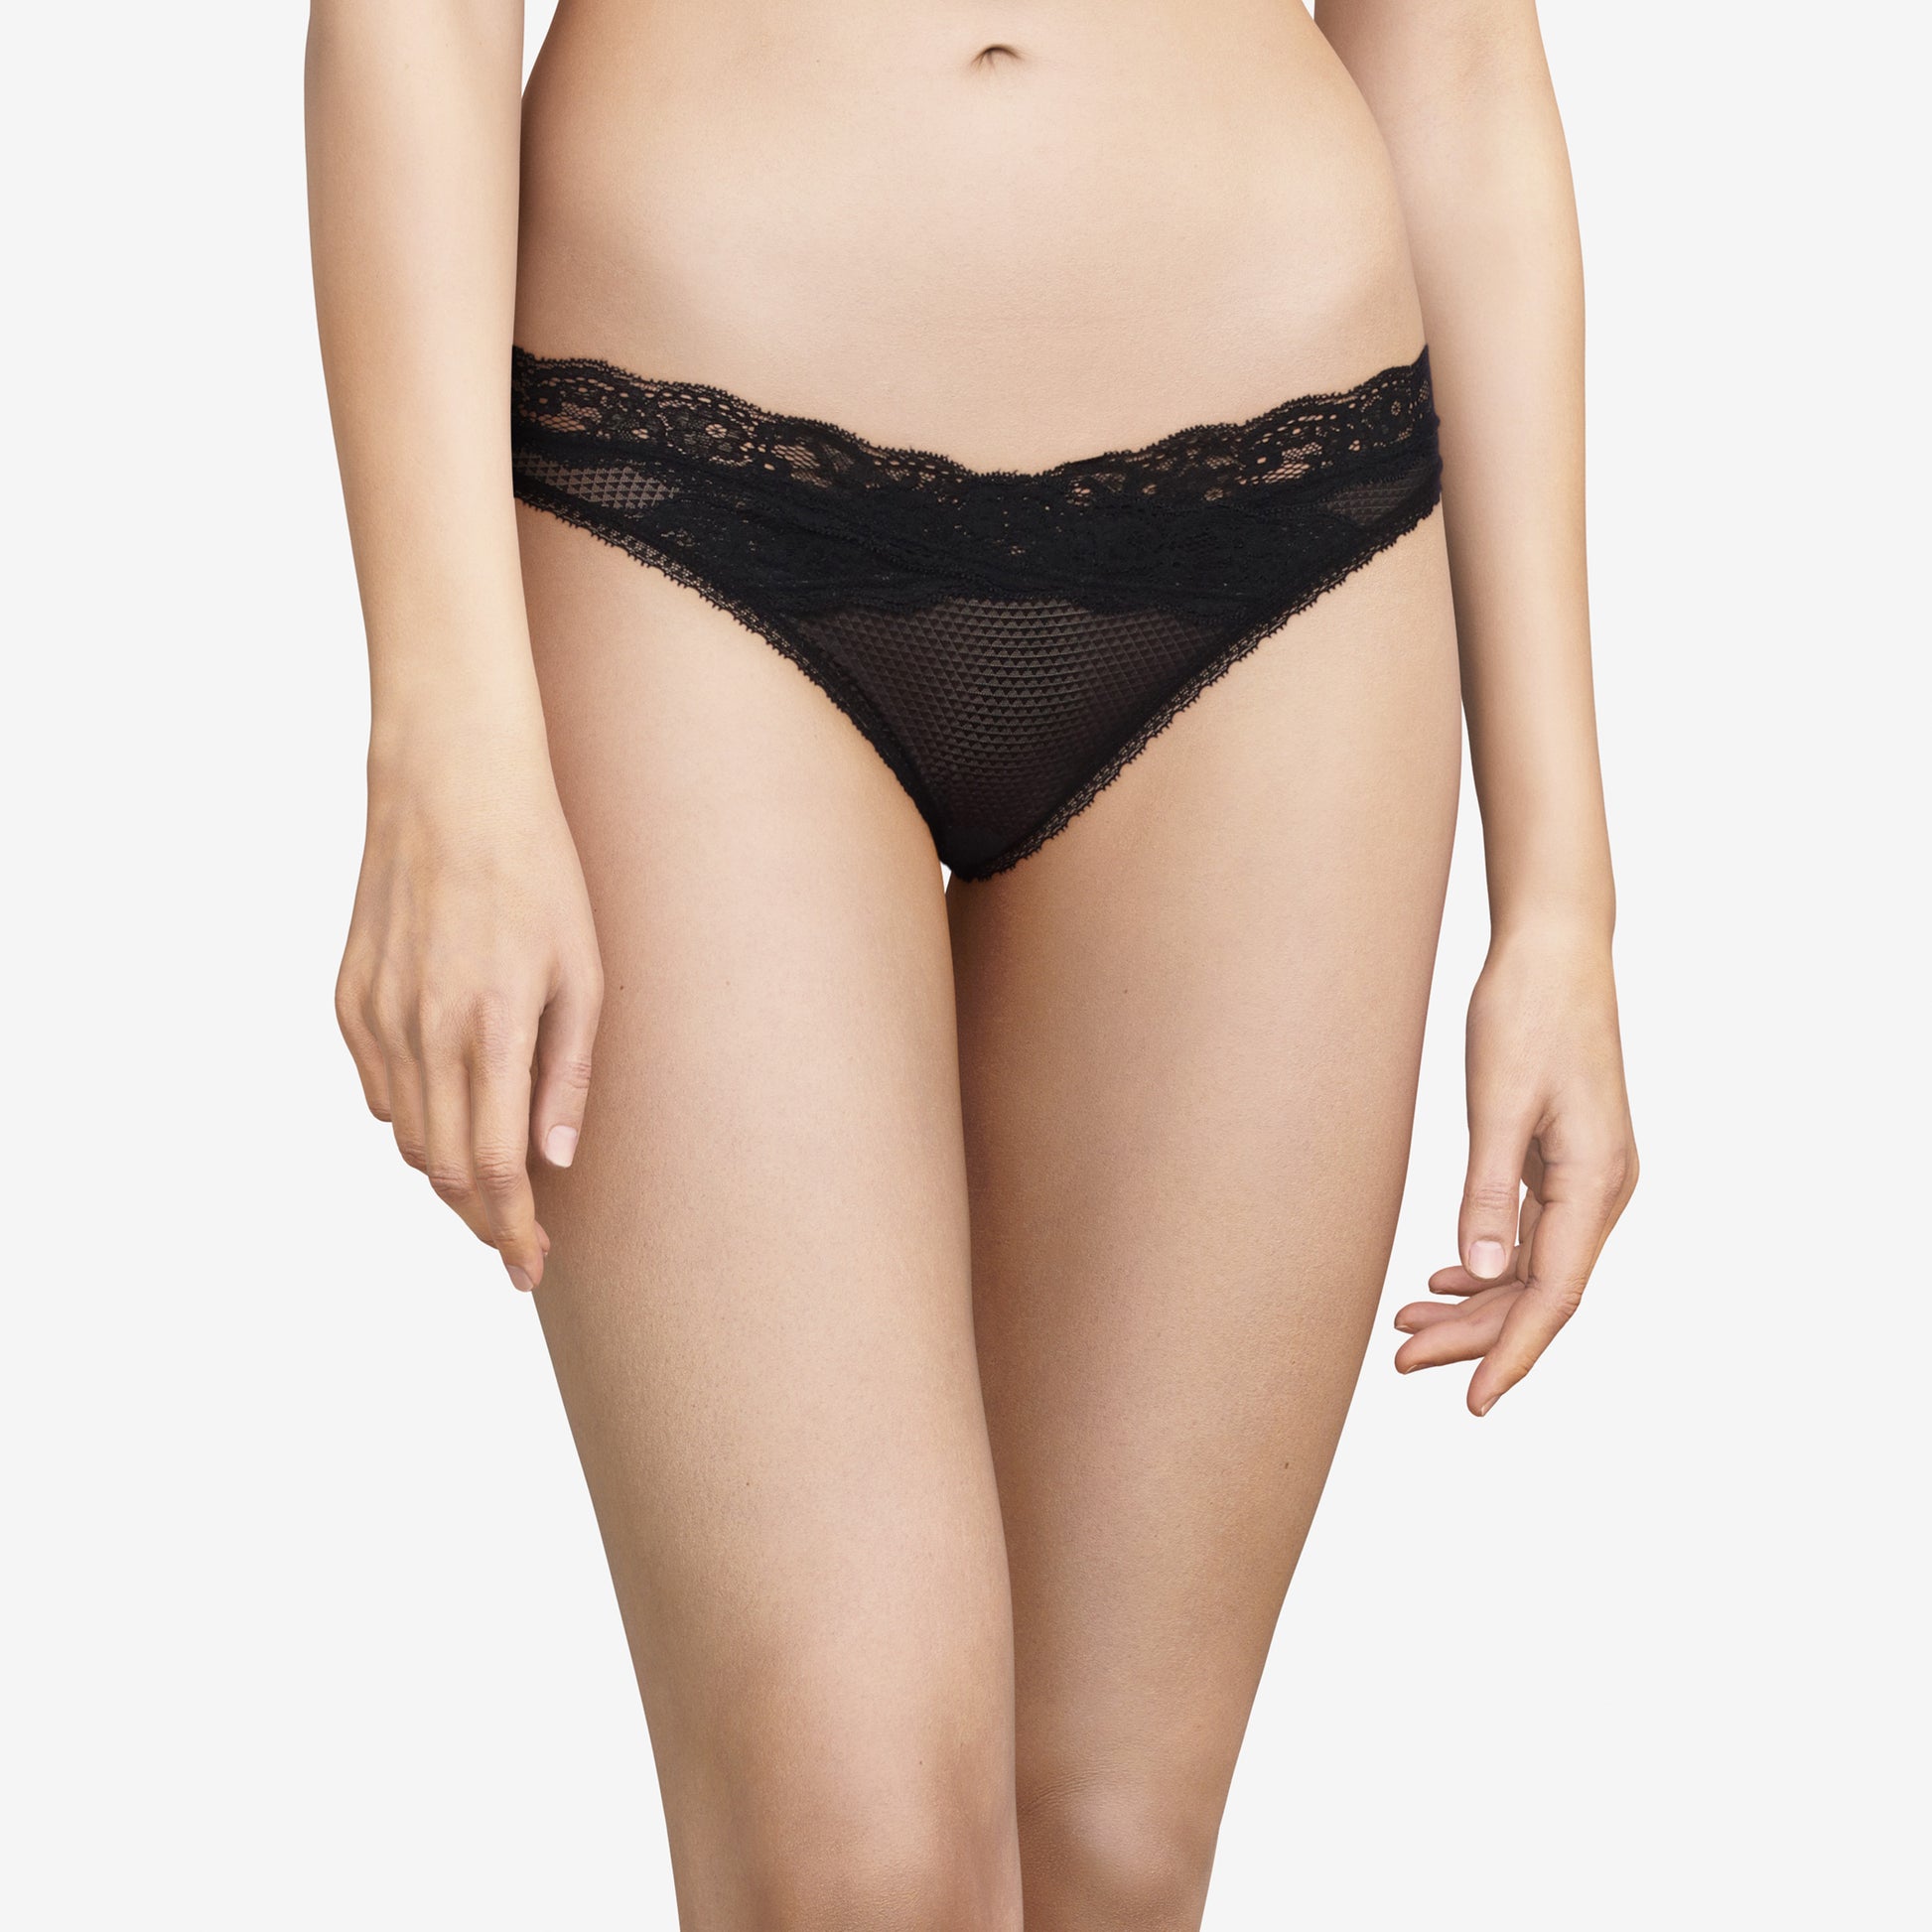 Pretty Things Chantelle Passionata Black Thong - Underwear Specialists 